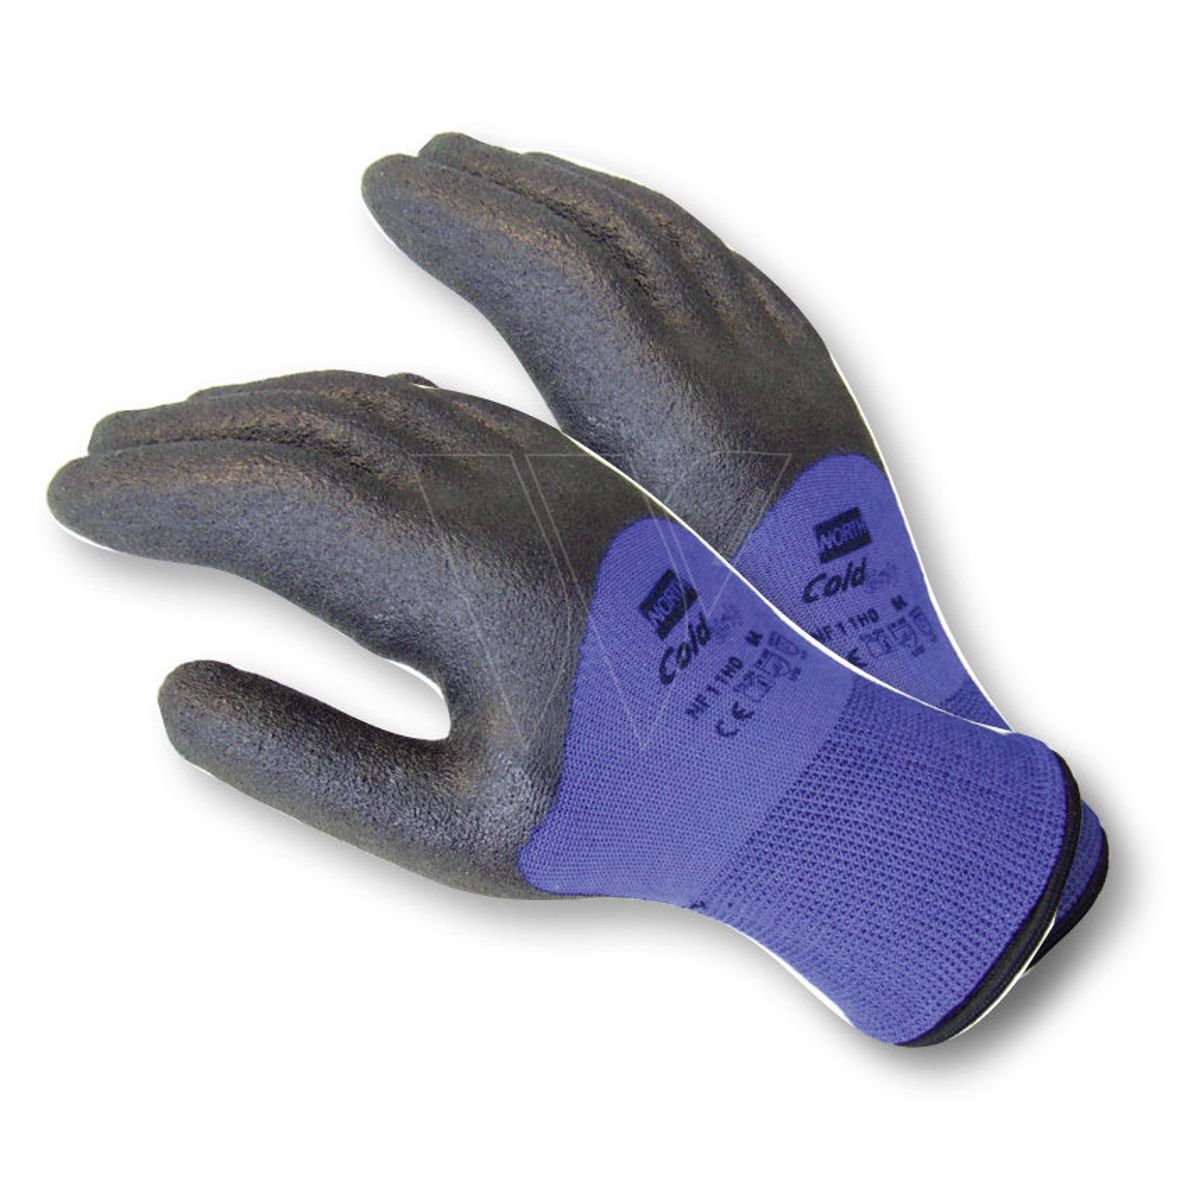 North cold grip lined glove 9